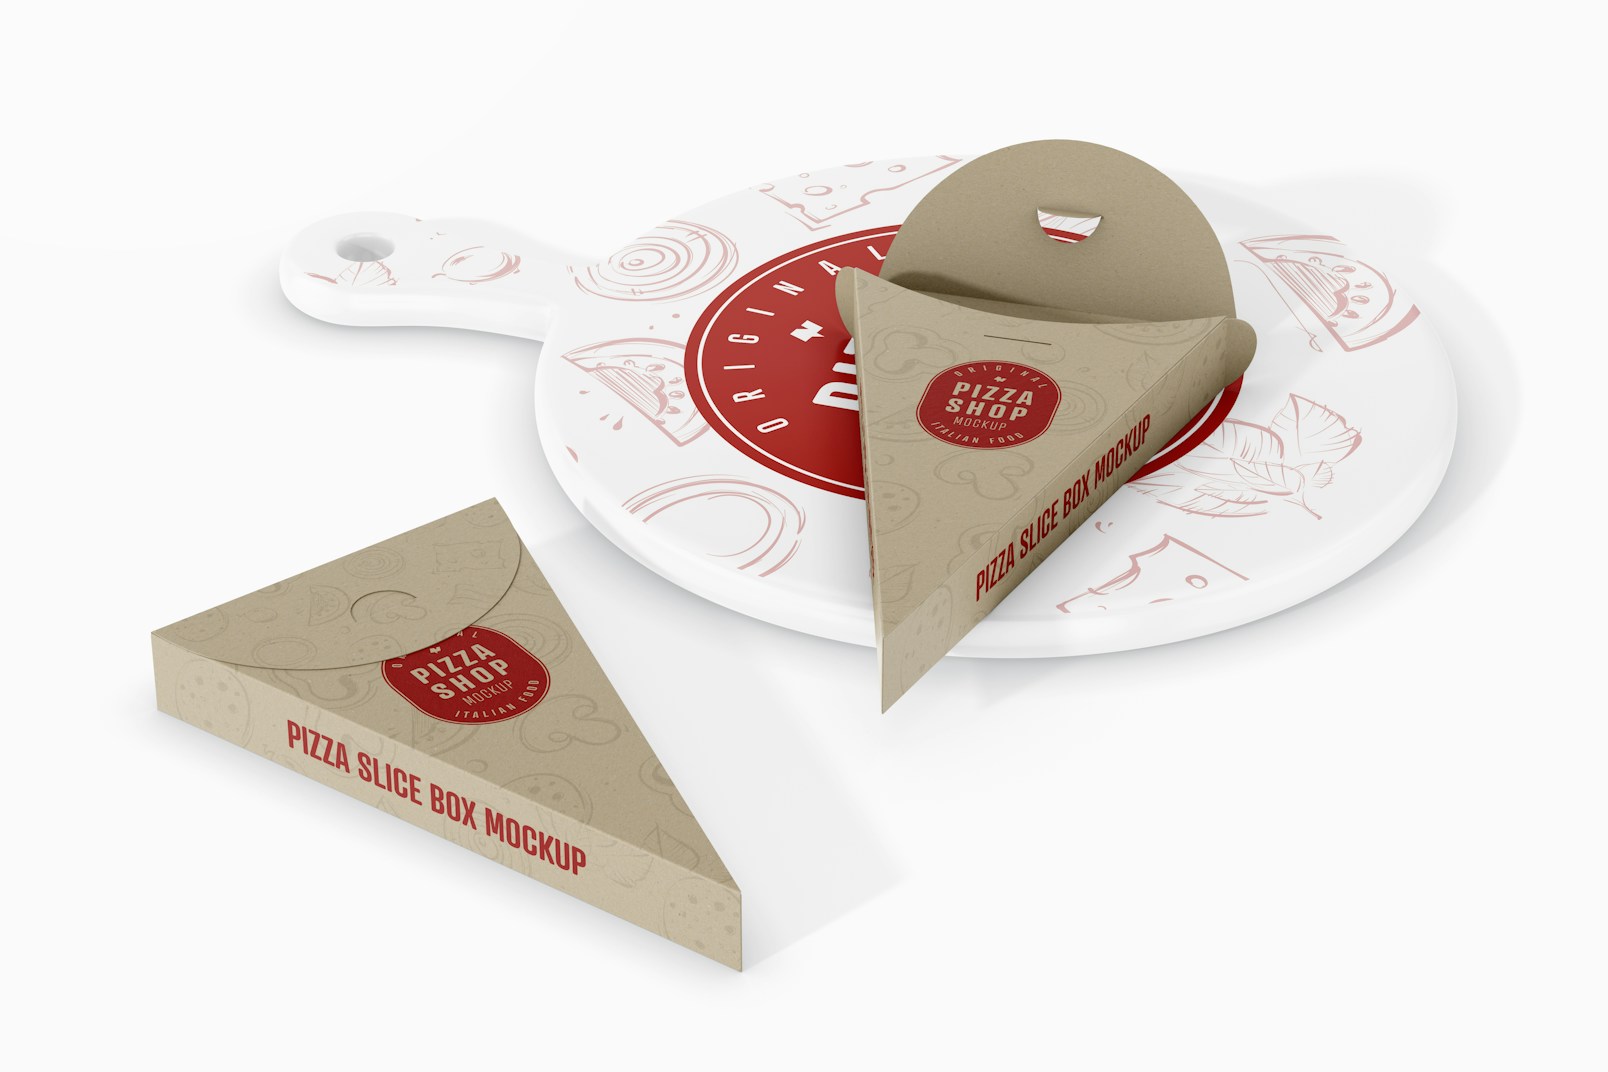 Pizza Slice Boxes Mockup, Opened and Closed